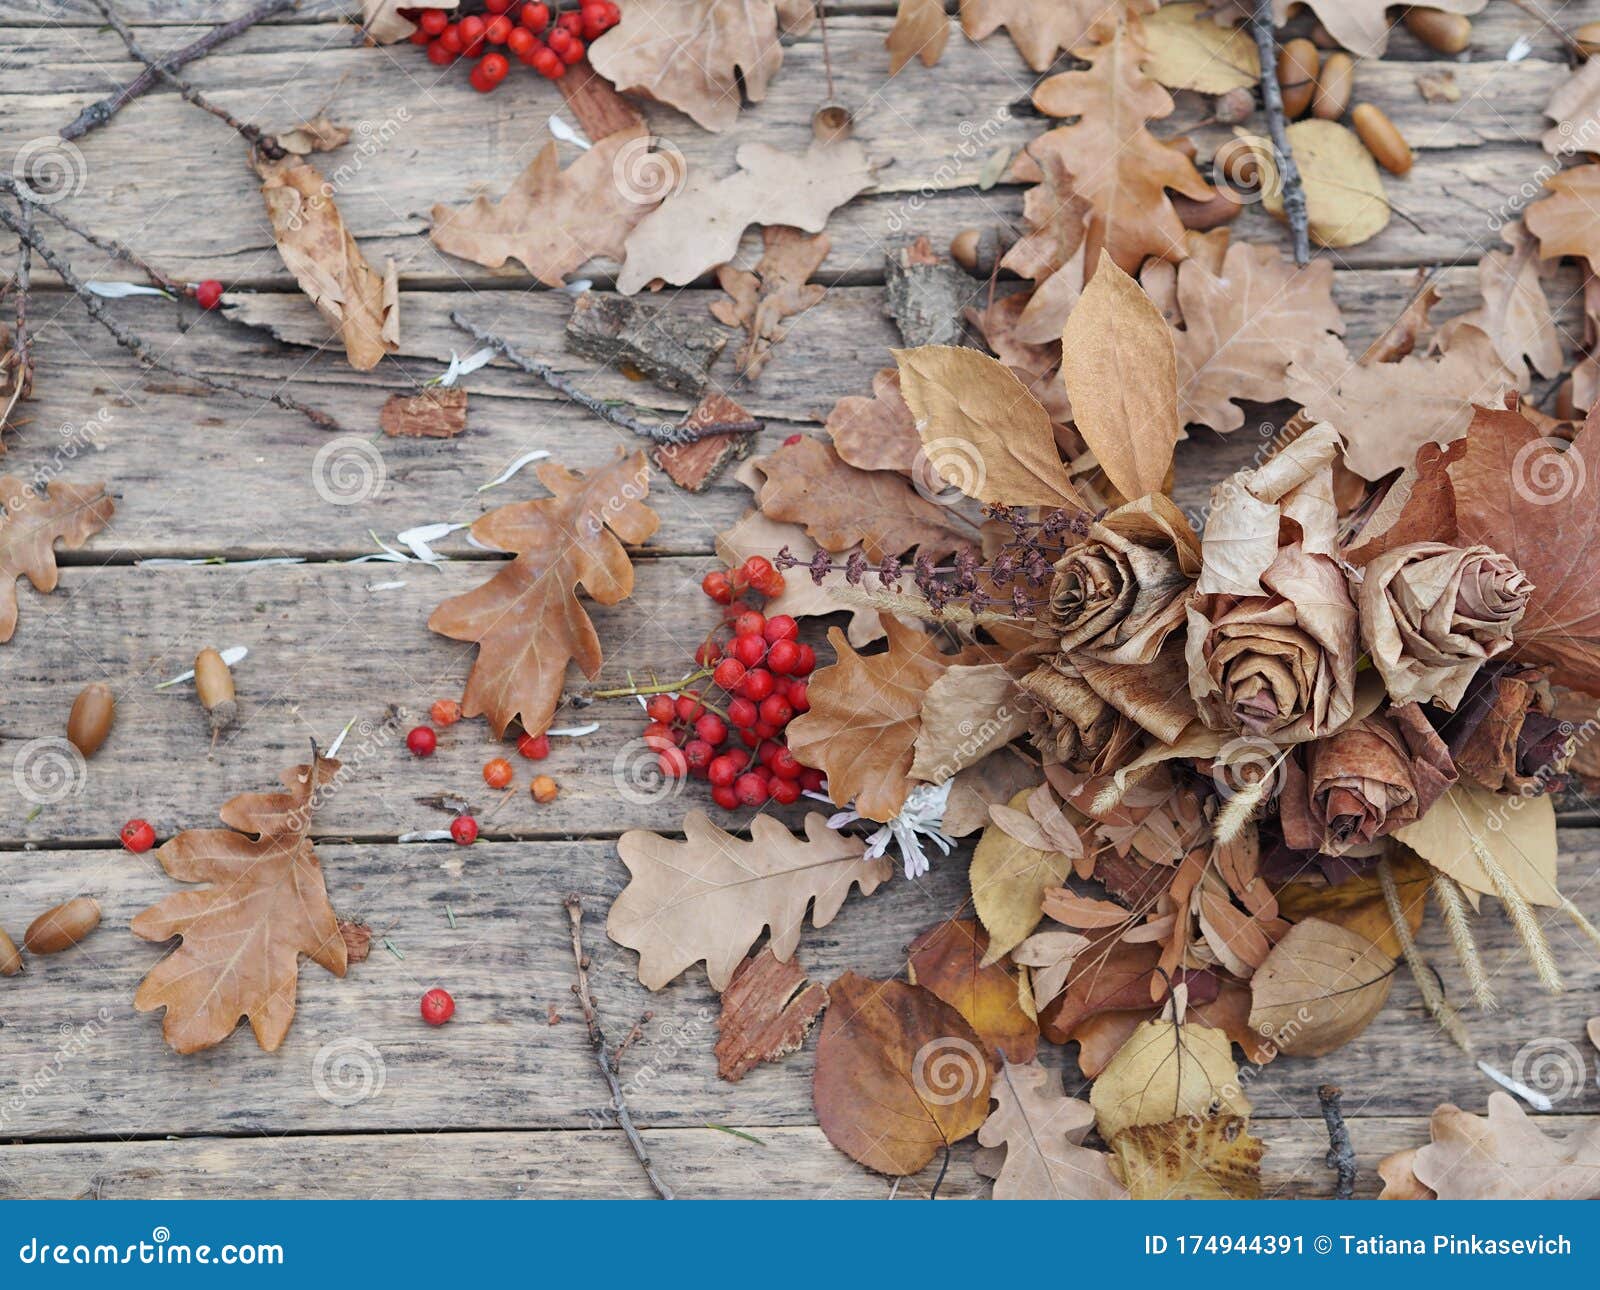 Wallpaper, Texture. Autumn Background of Roses Made from Dry Leaves, Autumn  Crafts with Your Own  for the Manual Stock Image - Image of  garden, background: 174944391